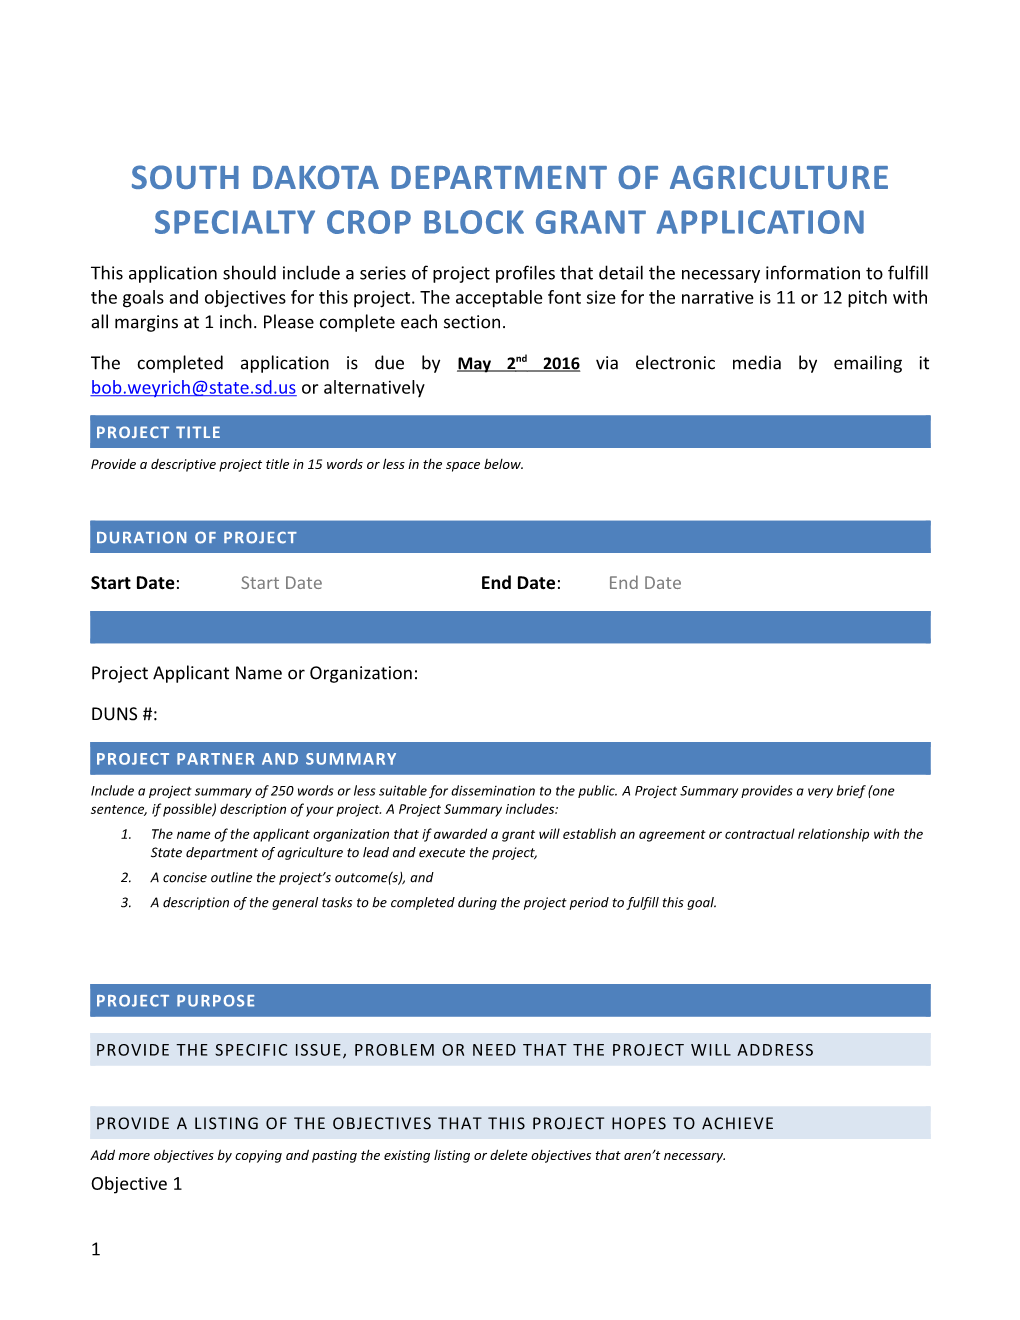 South Dakota Department of Agriculture Specialty Crop Block Grant Application